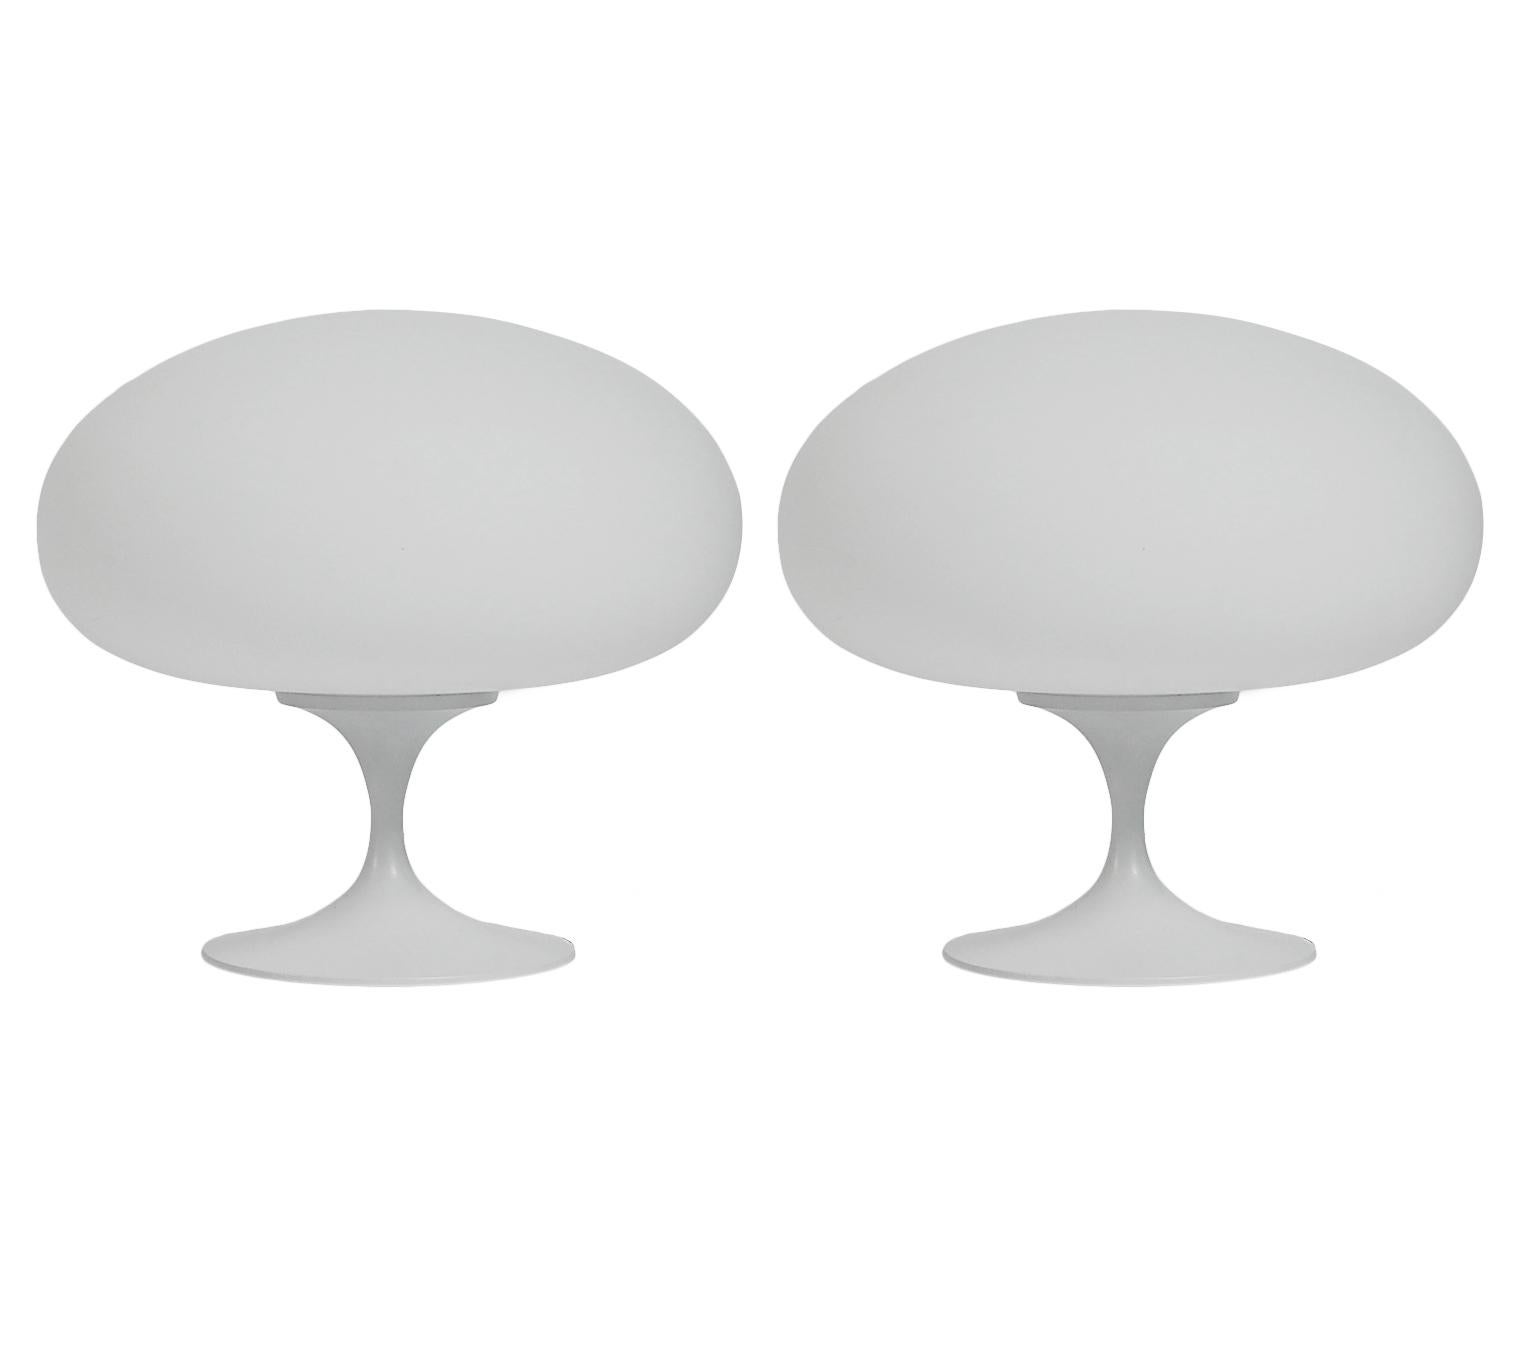 Aluminum Pair of Mid-Century Tulip Table Lamps by Designline in White on White Glass For Sale